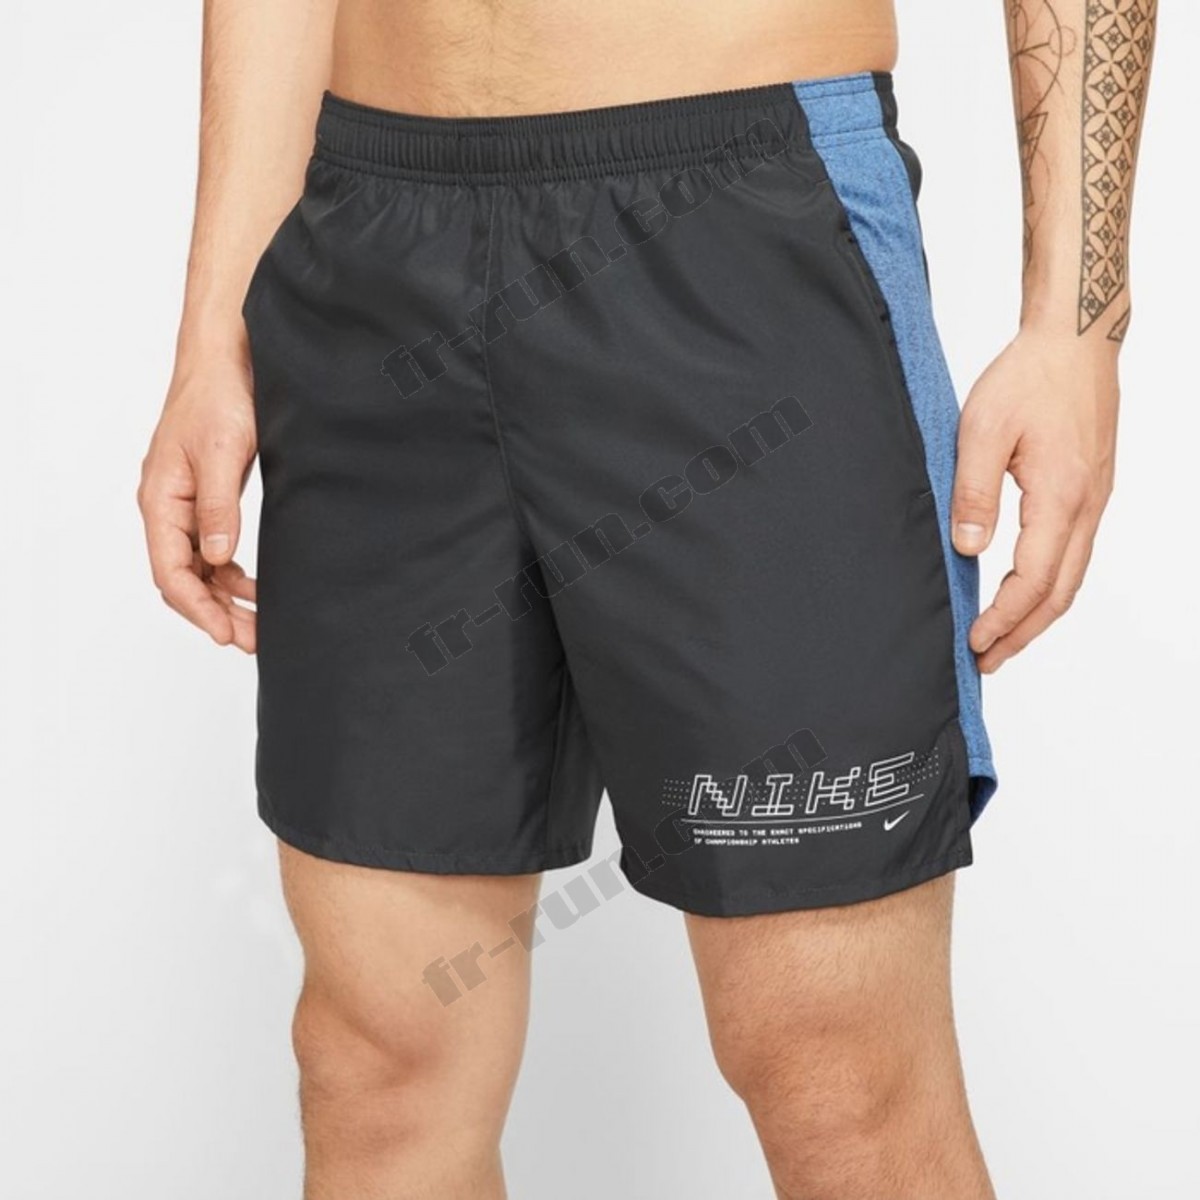 Nike/SHORT running homme NIKE CHLLGR SHORT 7IN BF GX FF √ Nouveau style √ Soldes - Nike/SHORT running homme NIKE CHLLGR SHORT 7IN BF GX FF √ Nouveau style √ Soldes